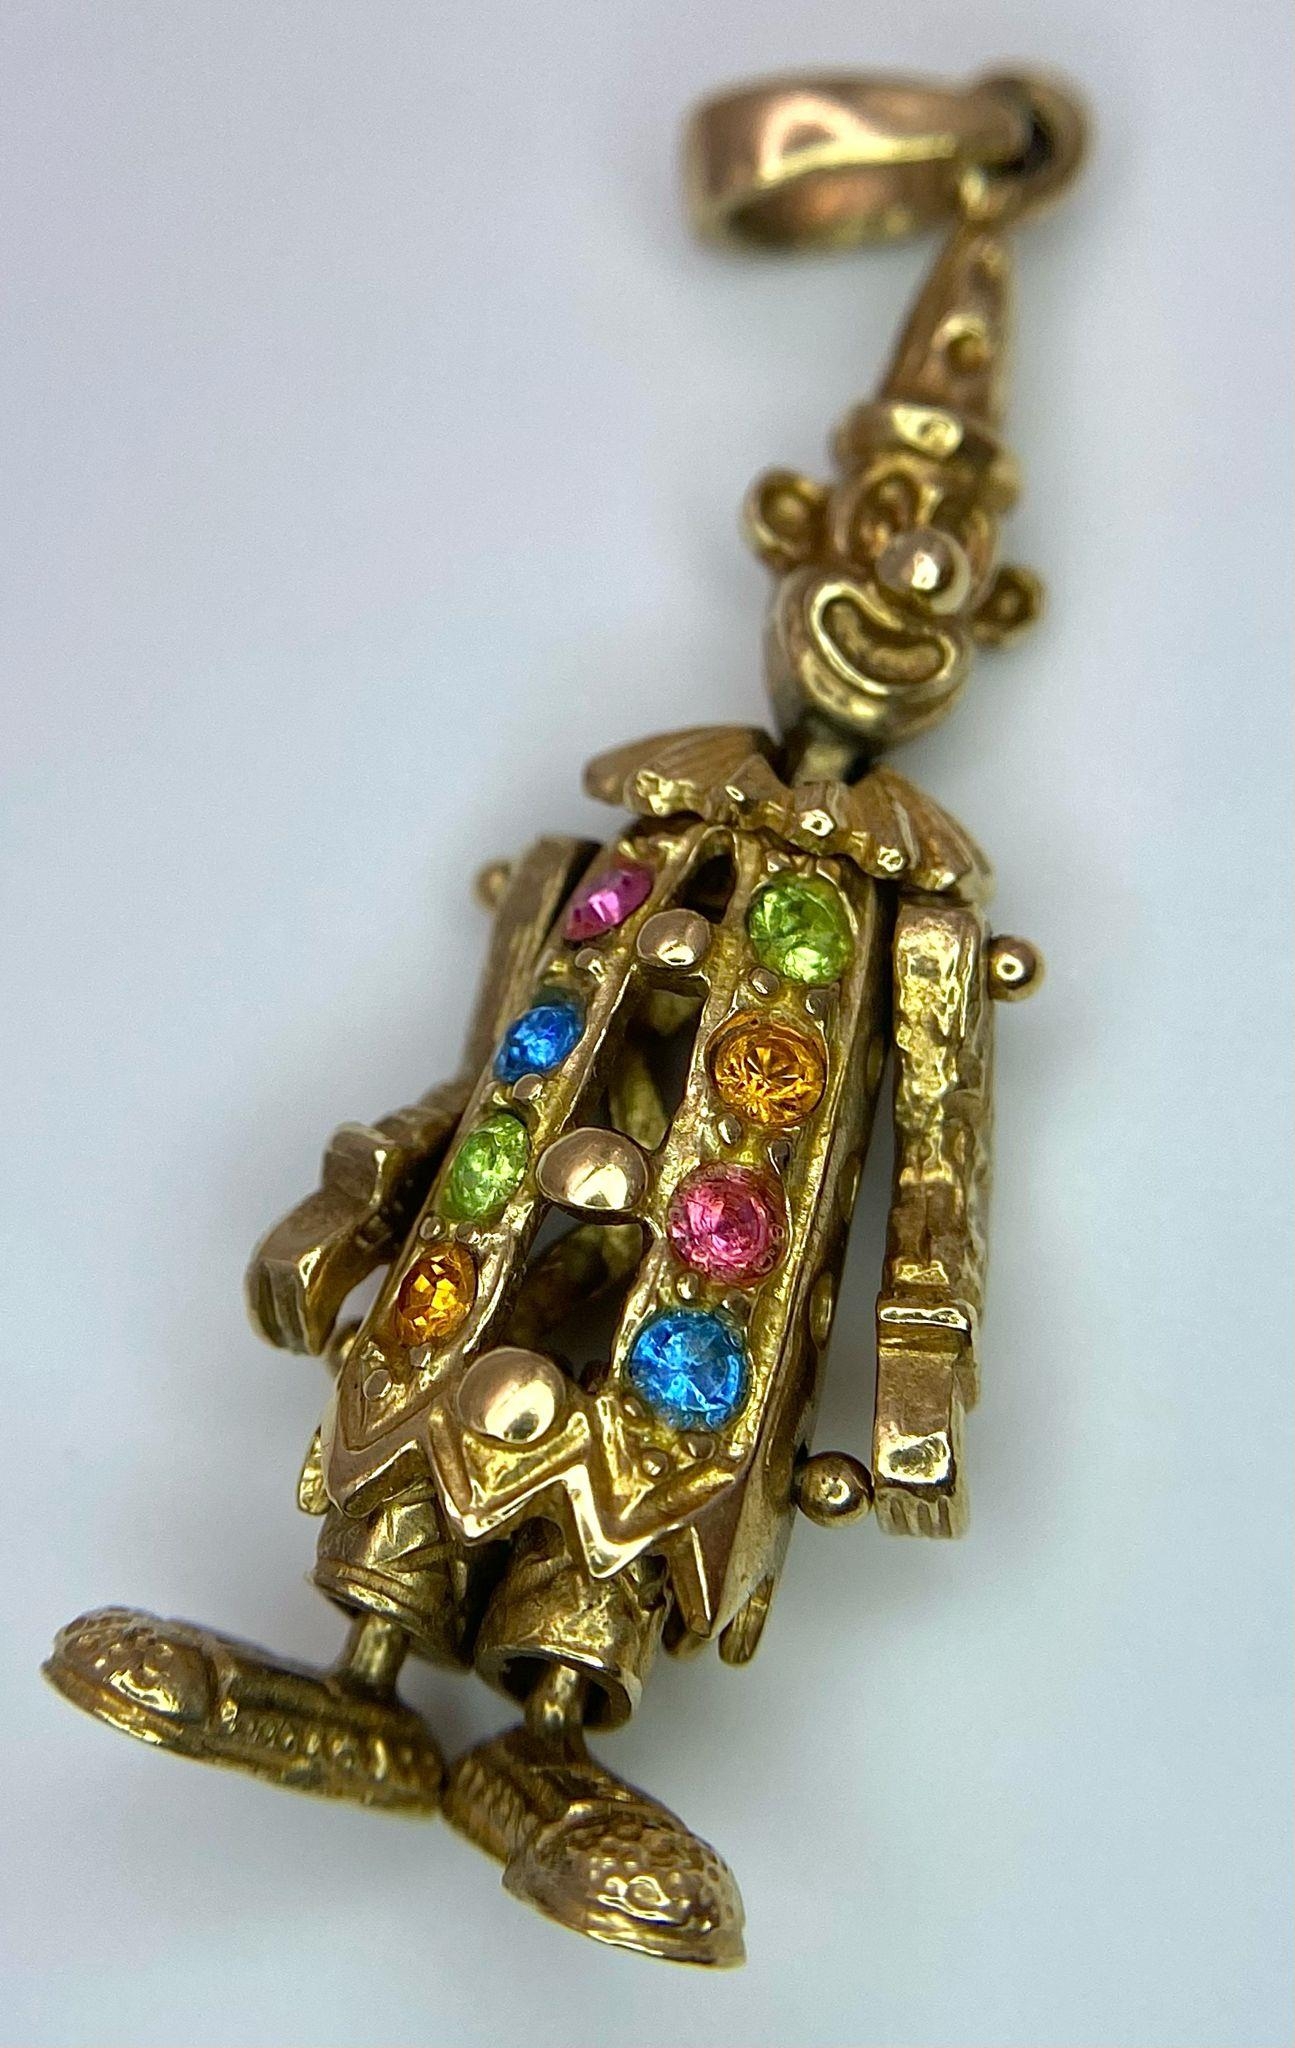 An Amazing Vintage 9K Yellow Gold Multi-Gemstone Articulated Clown Pendant. Citrine, topaz, - Image 2 of 6